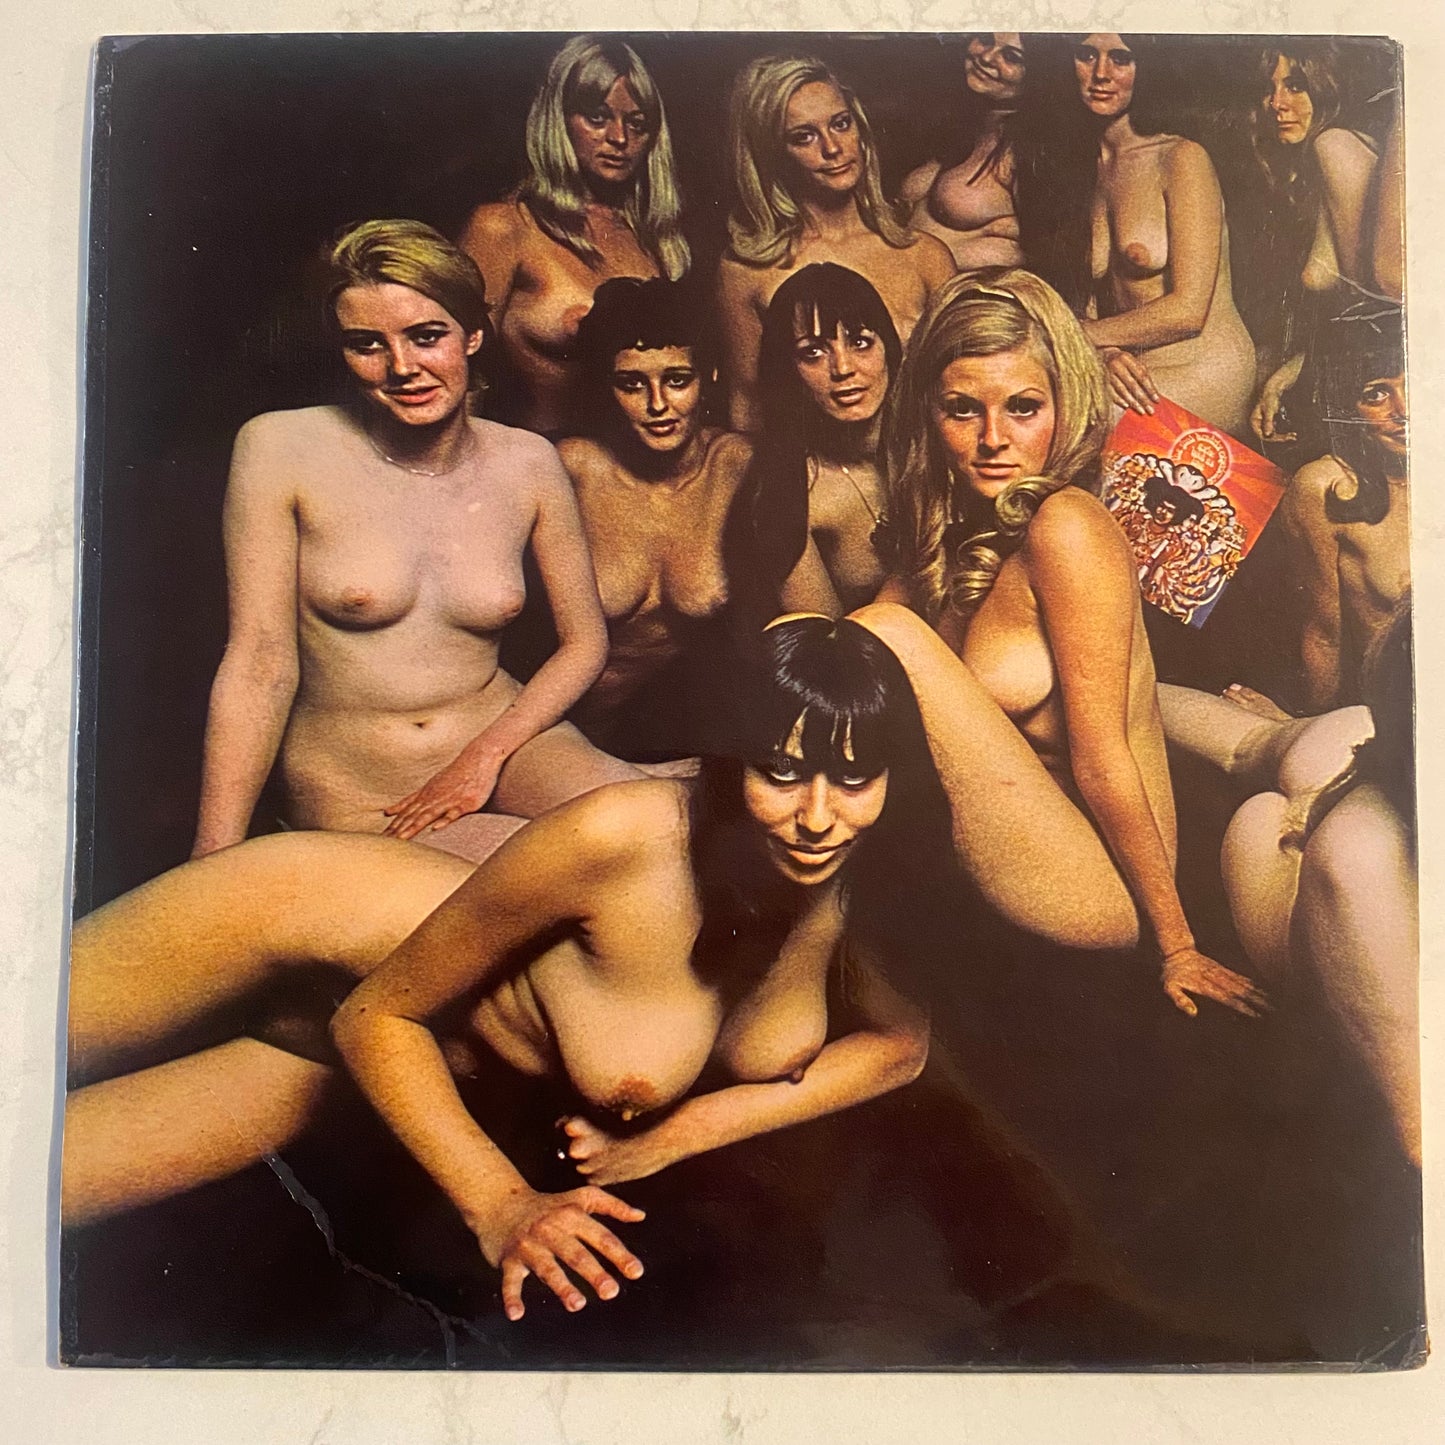 The Jimi Hendrix Experience - Electric Ladyland (2xLP, Album, RE, Gat)